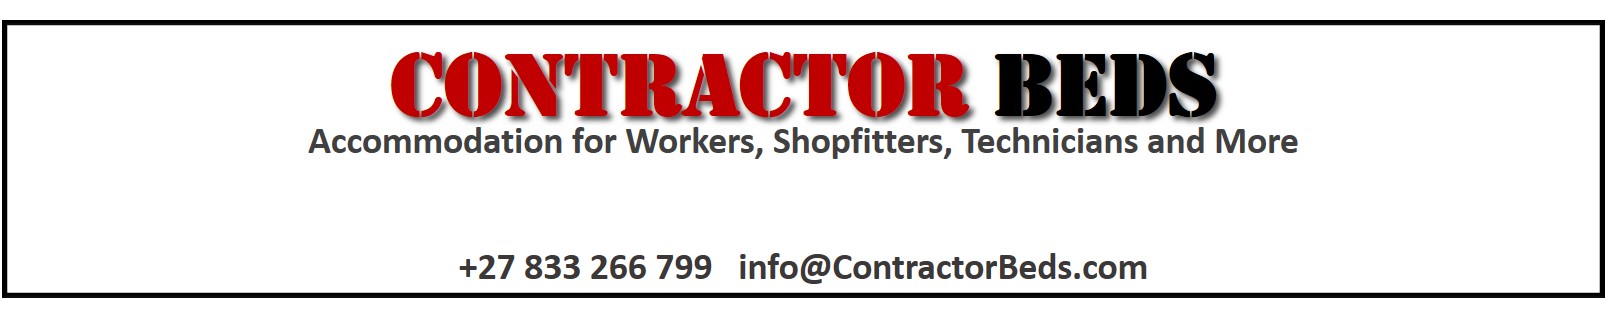 Projects for Contractors in South Africa